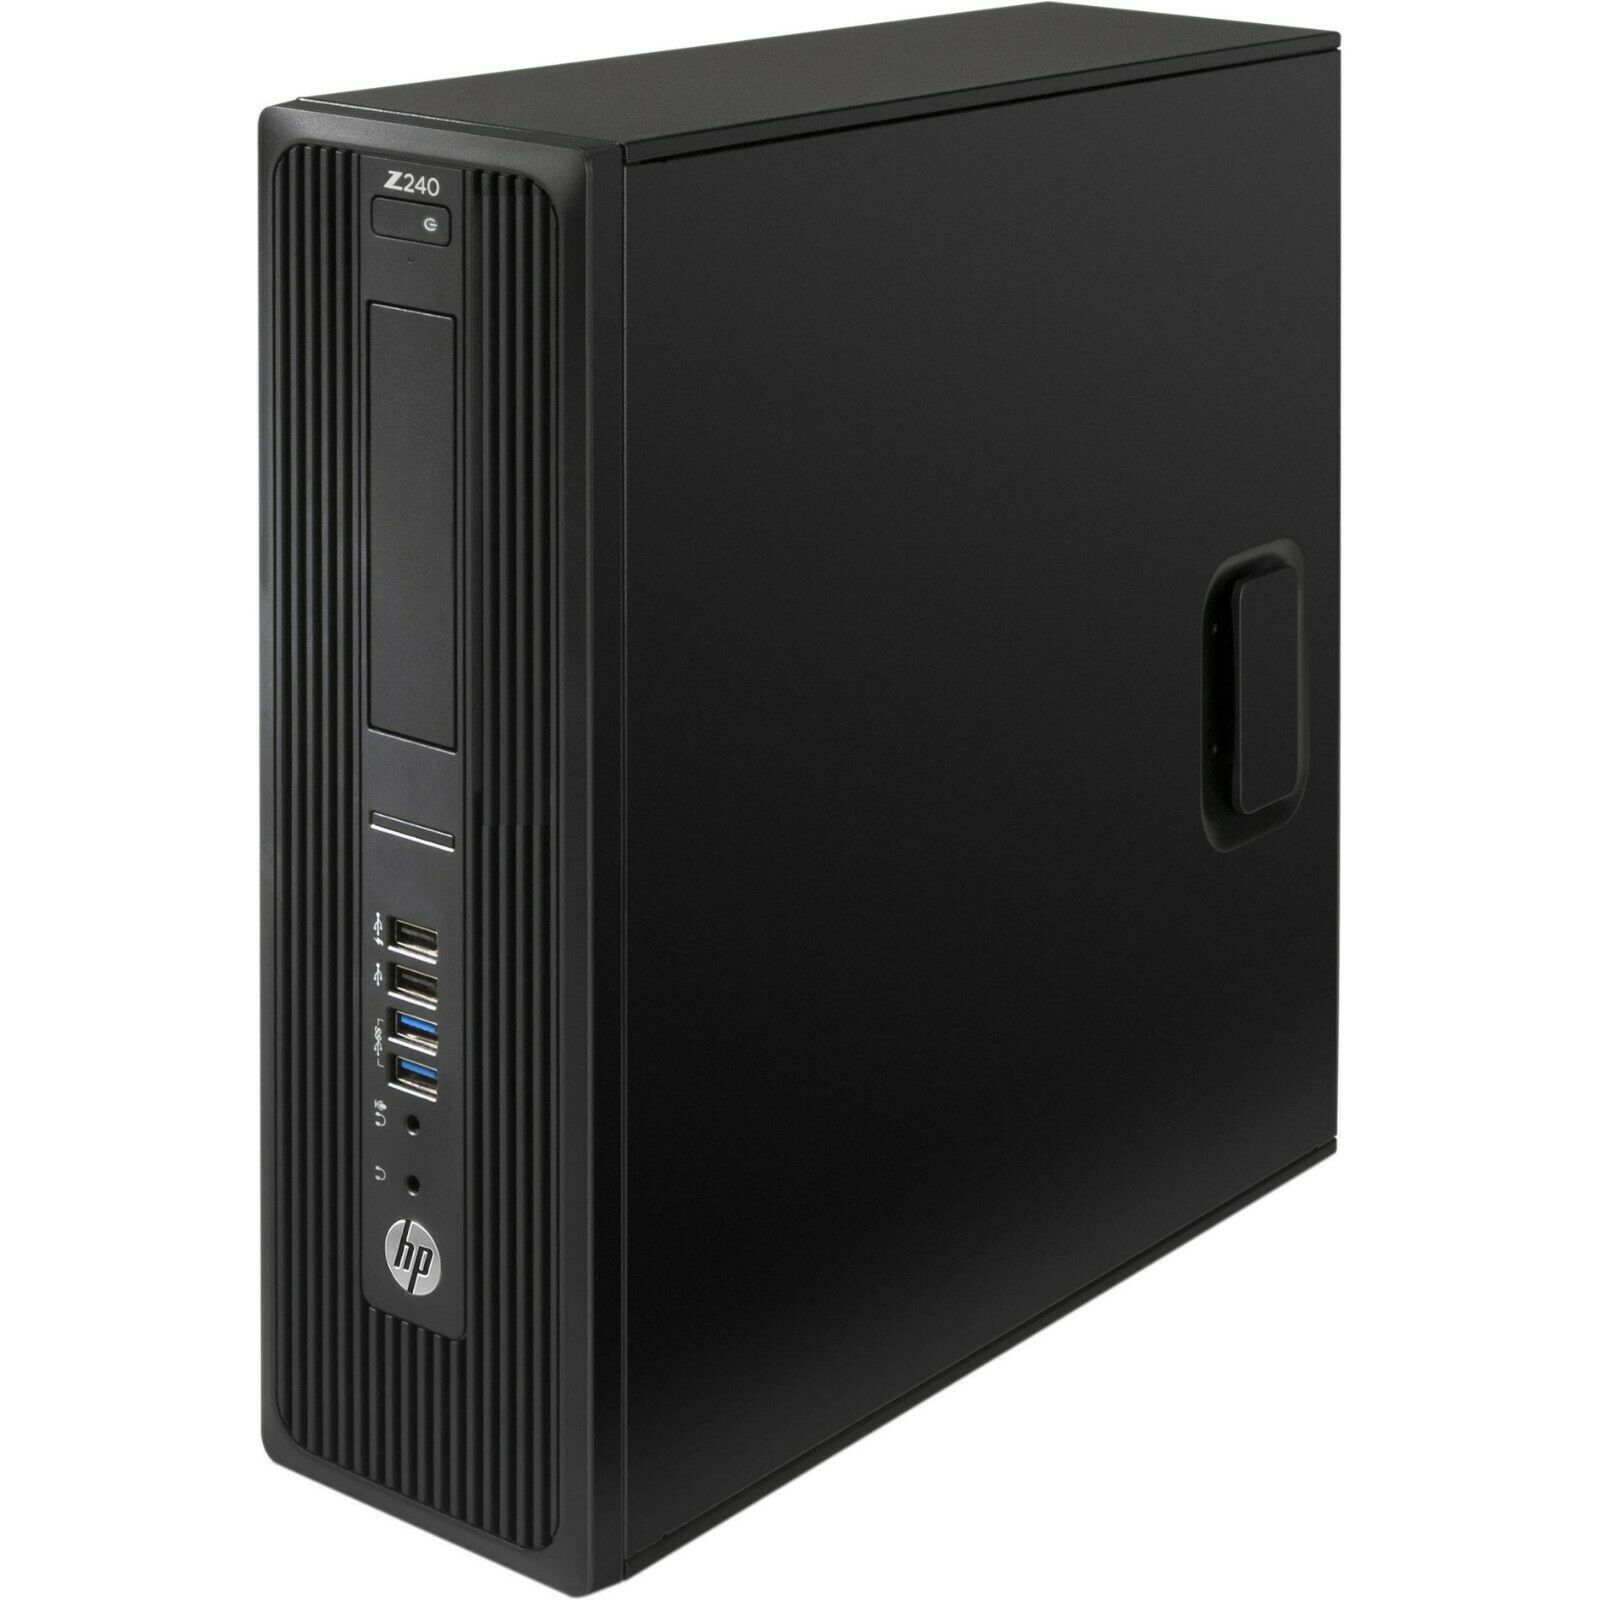 Restored Gaming HP Z240 Workstation SFF Computer Core i5 6th 3.4GHz, 16GB Ram, 500GB HDD, 240GB M.2 SSD, NVIDIA GT 730, New 22" LCD, Keyboard and Mouse, Wi-Fi, Win10 Home Desktop PC (Refurbished) - image 2 of 12